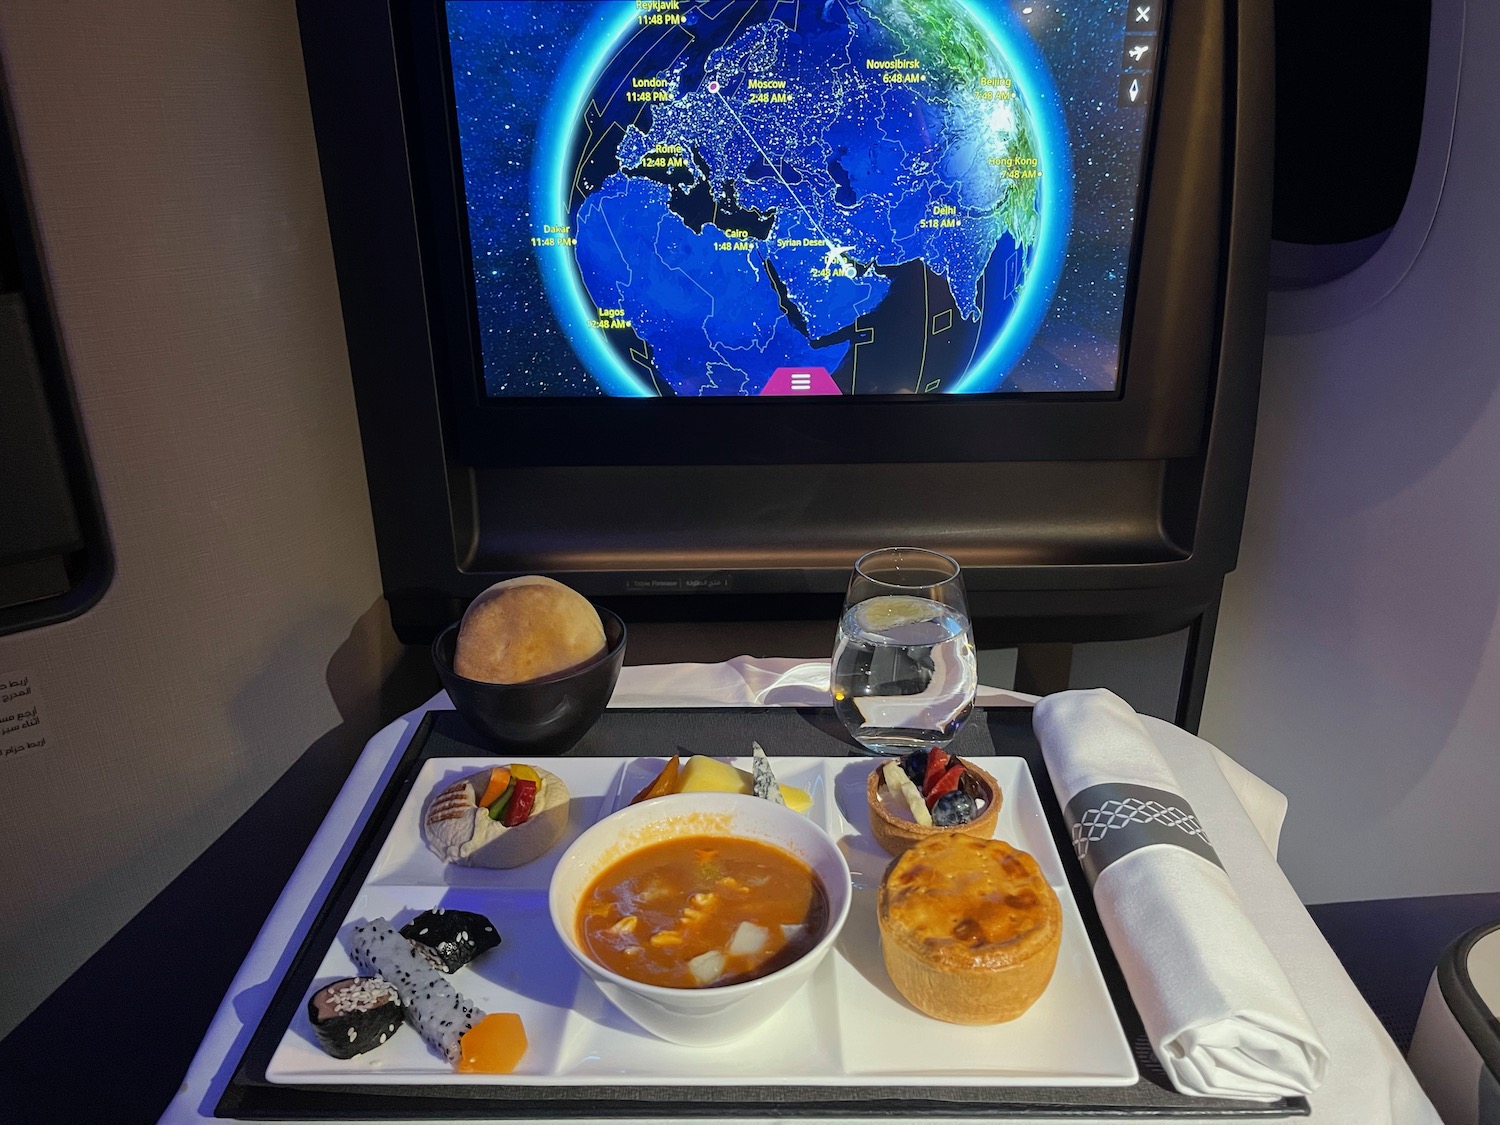 a tray with food on it and a television screen